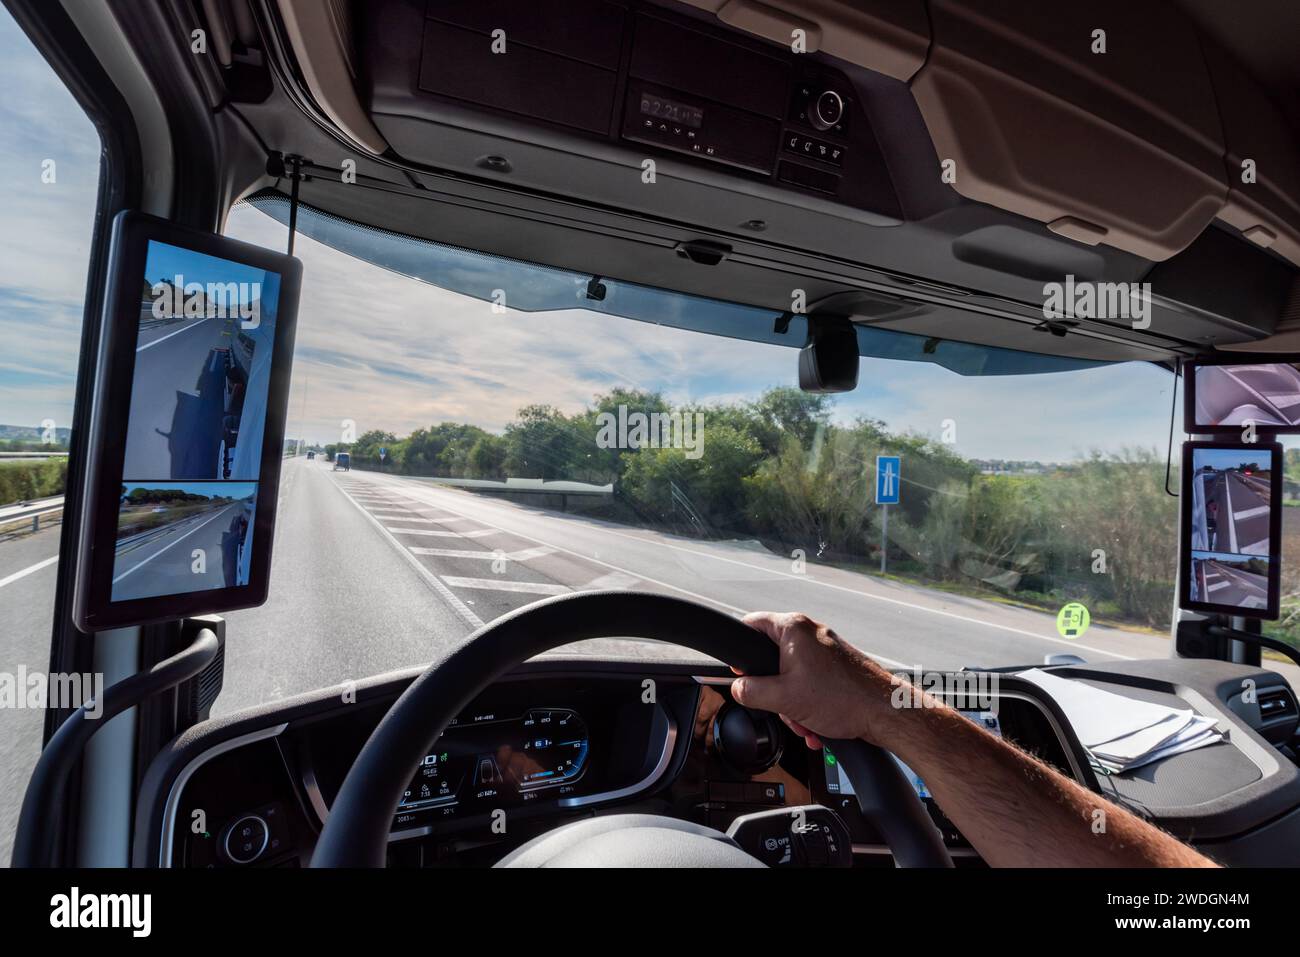 View from the driver's position of a truck on the road of the interior of the cabin with the screens as rear-view mirrors. Stock Photo